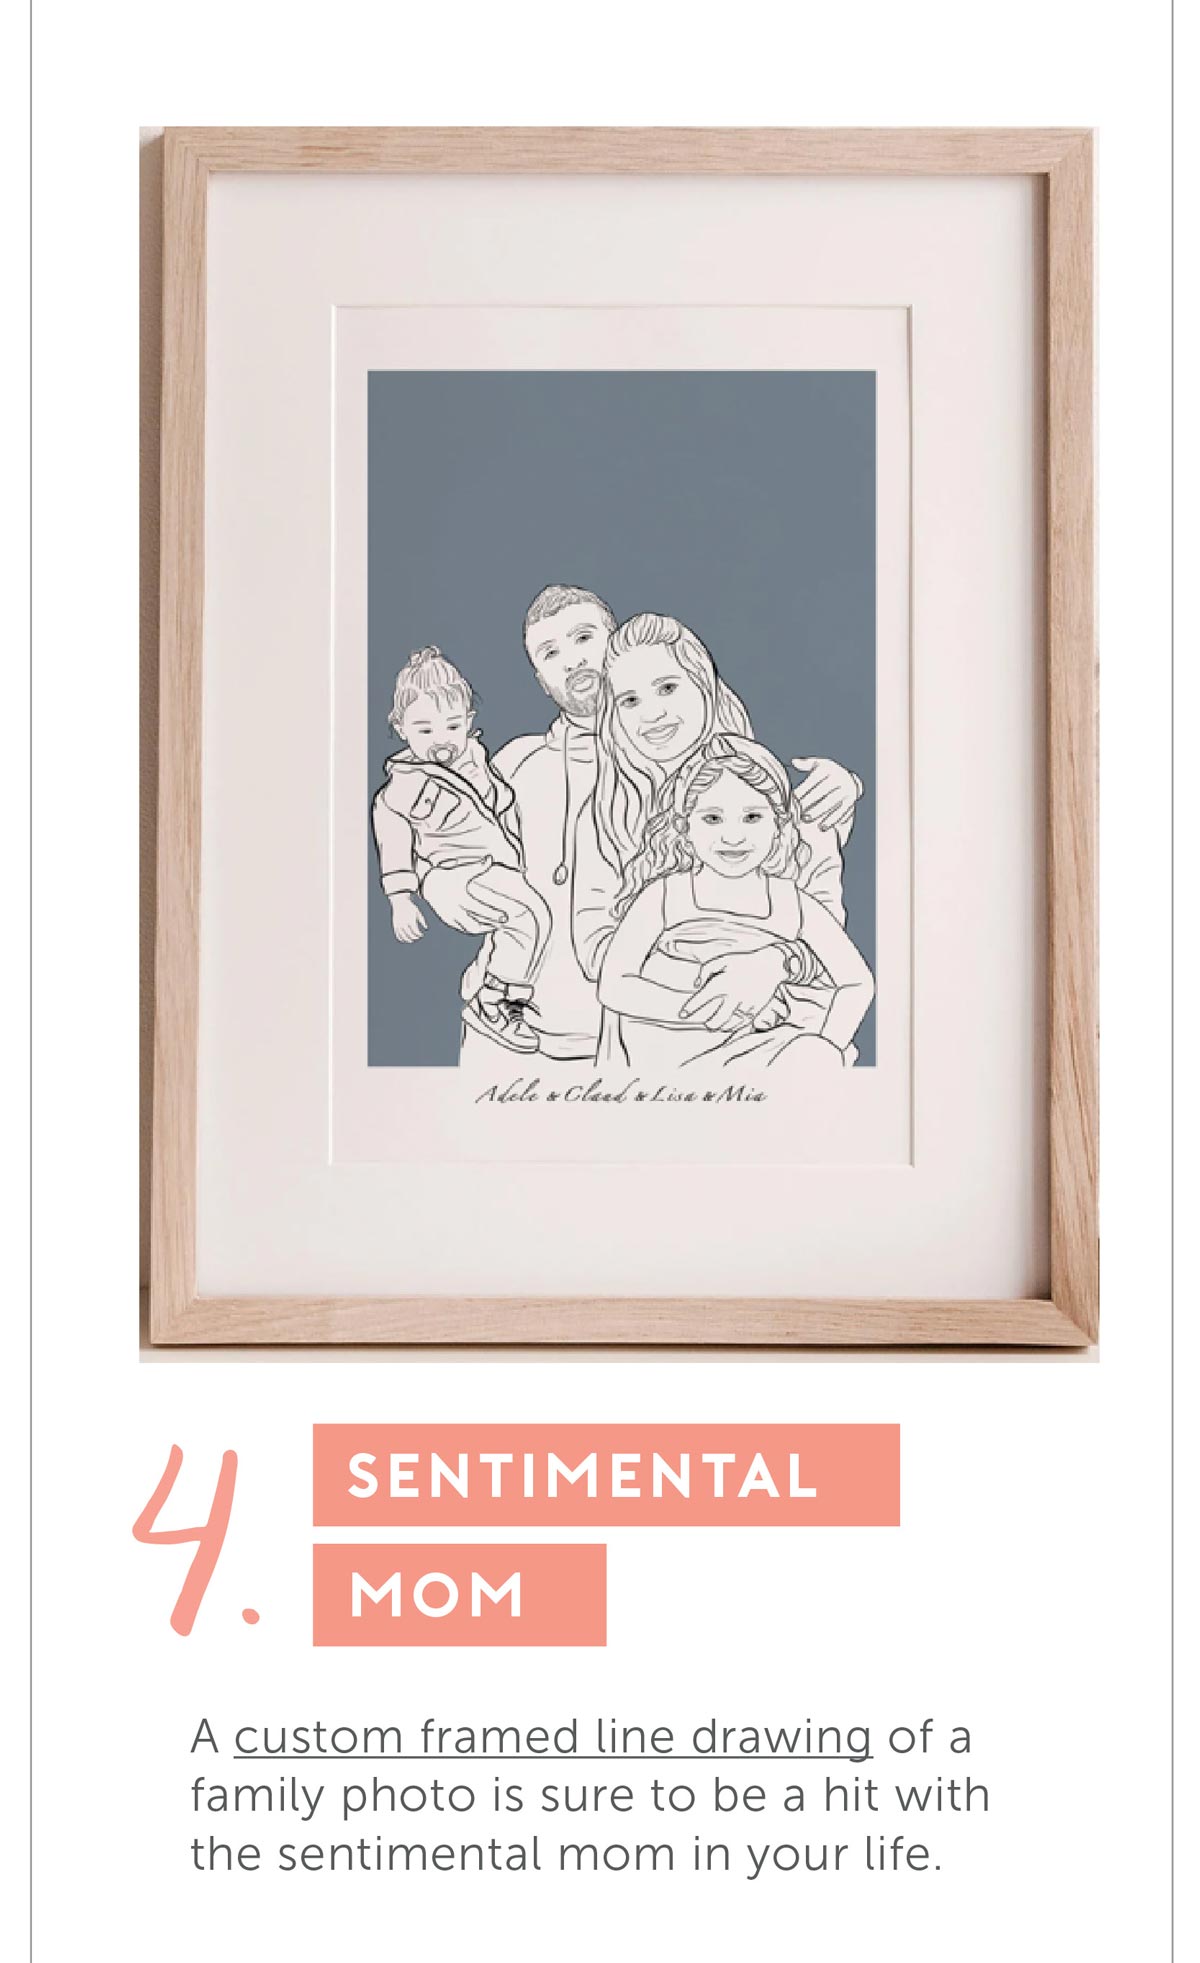 4. For the Sentimental Mom. A custom framed line drawing of a family photo is sure to be a hit with the sentimental mom in your life.